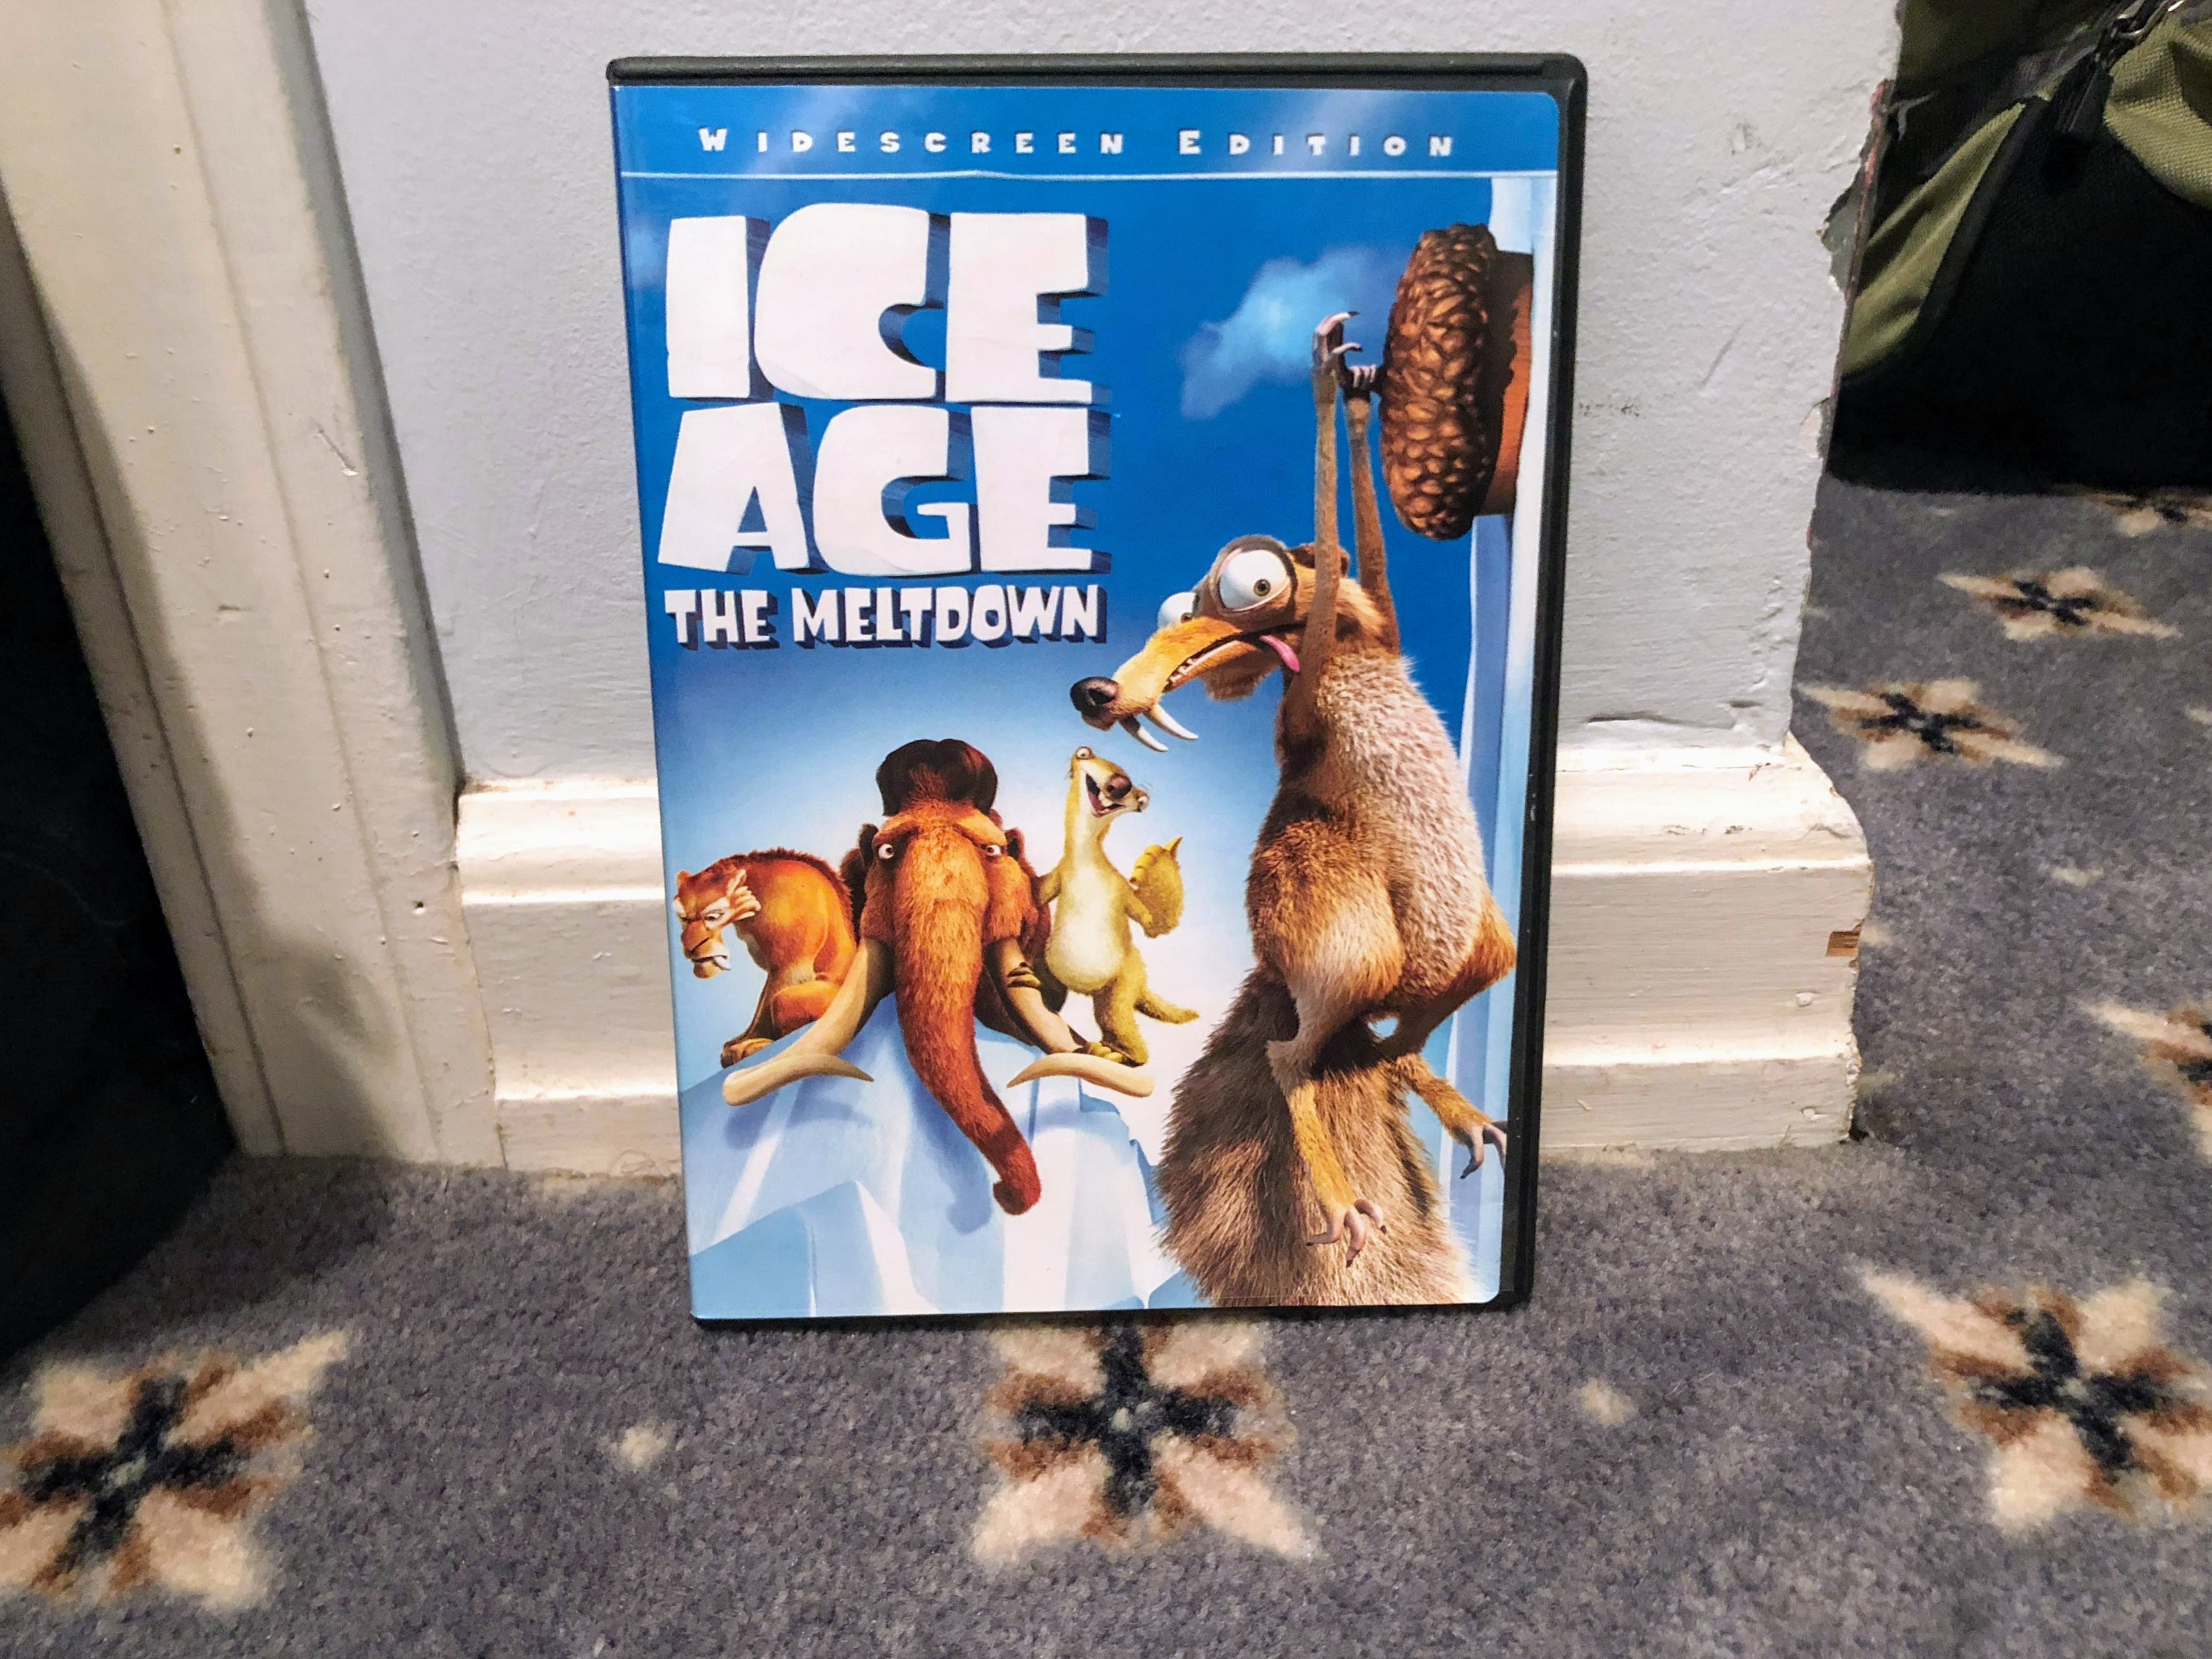 ice age dvd pack